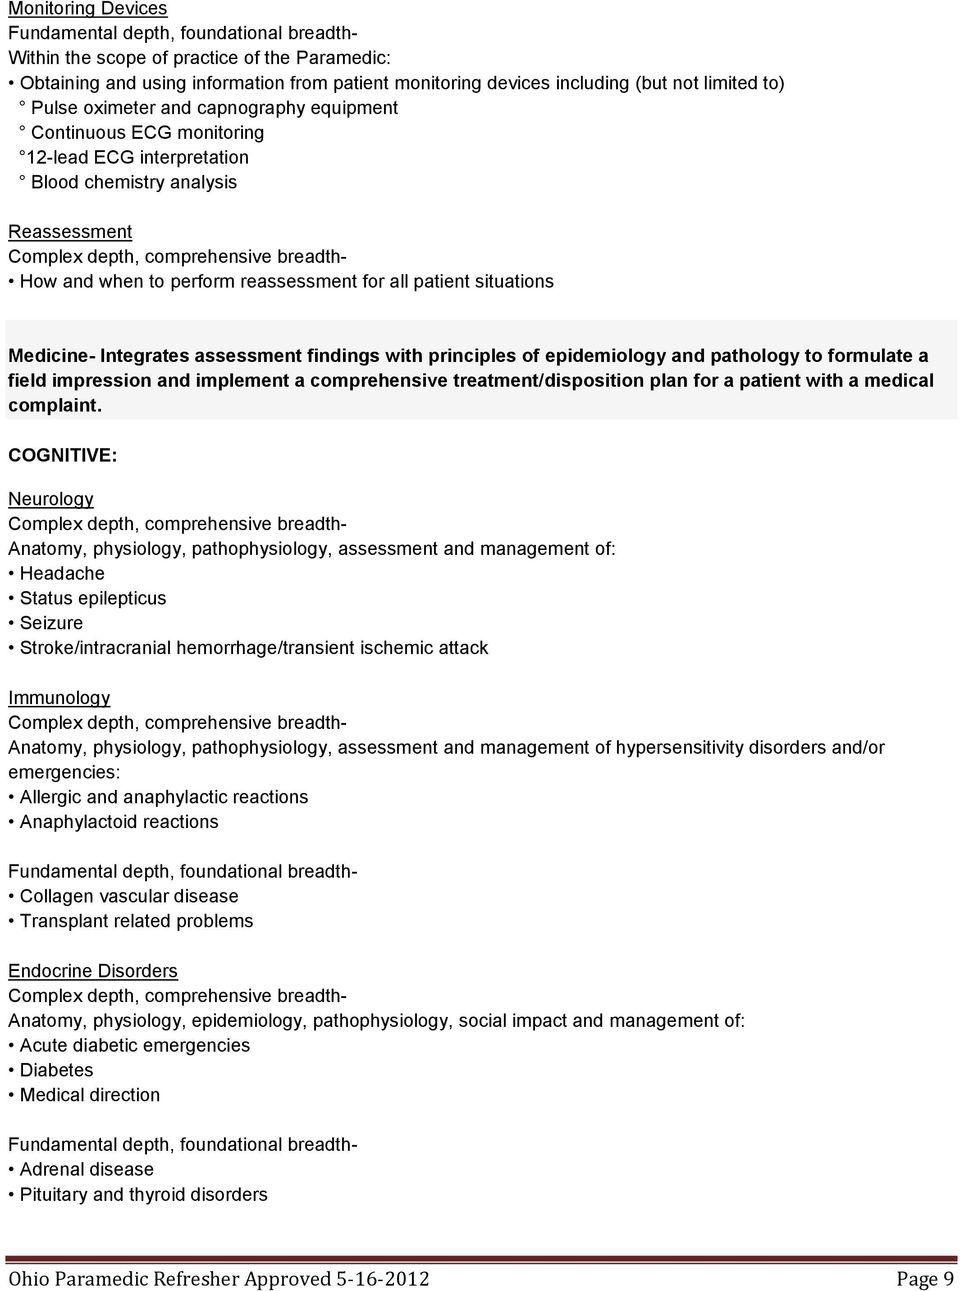 findings with principles of epidemiology and pathology to formulate a field impression and implement a comprehensive treatment/disposition plan for a patient with a medical complaint.